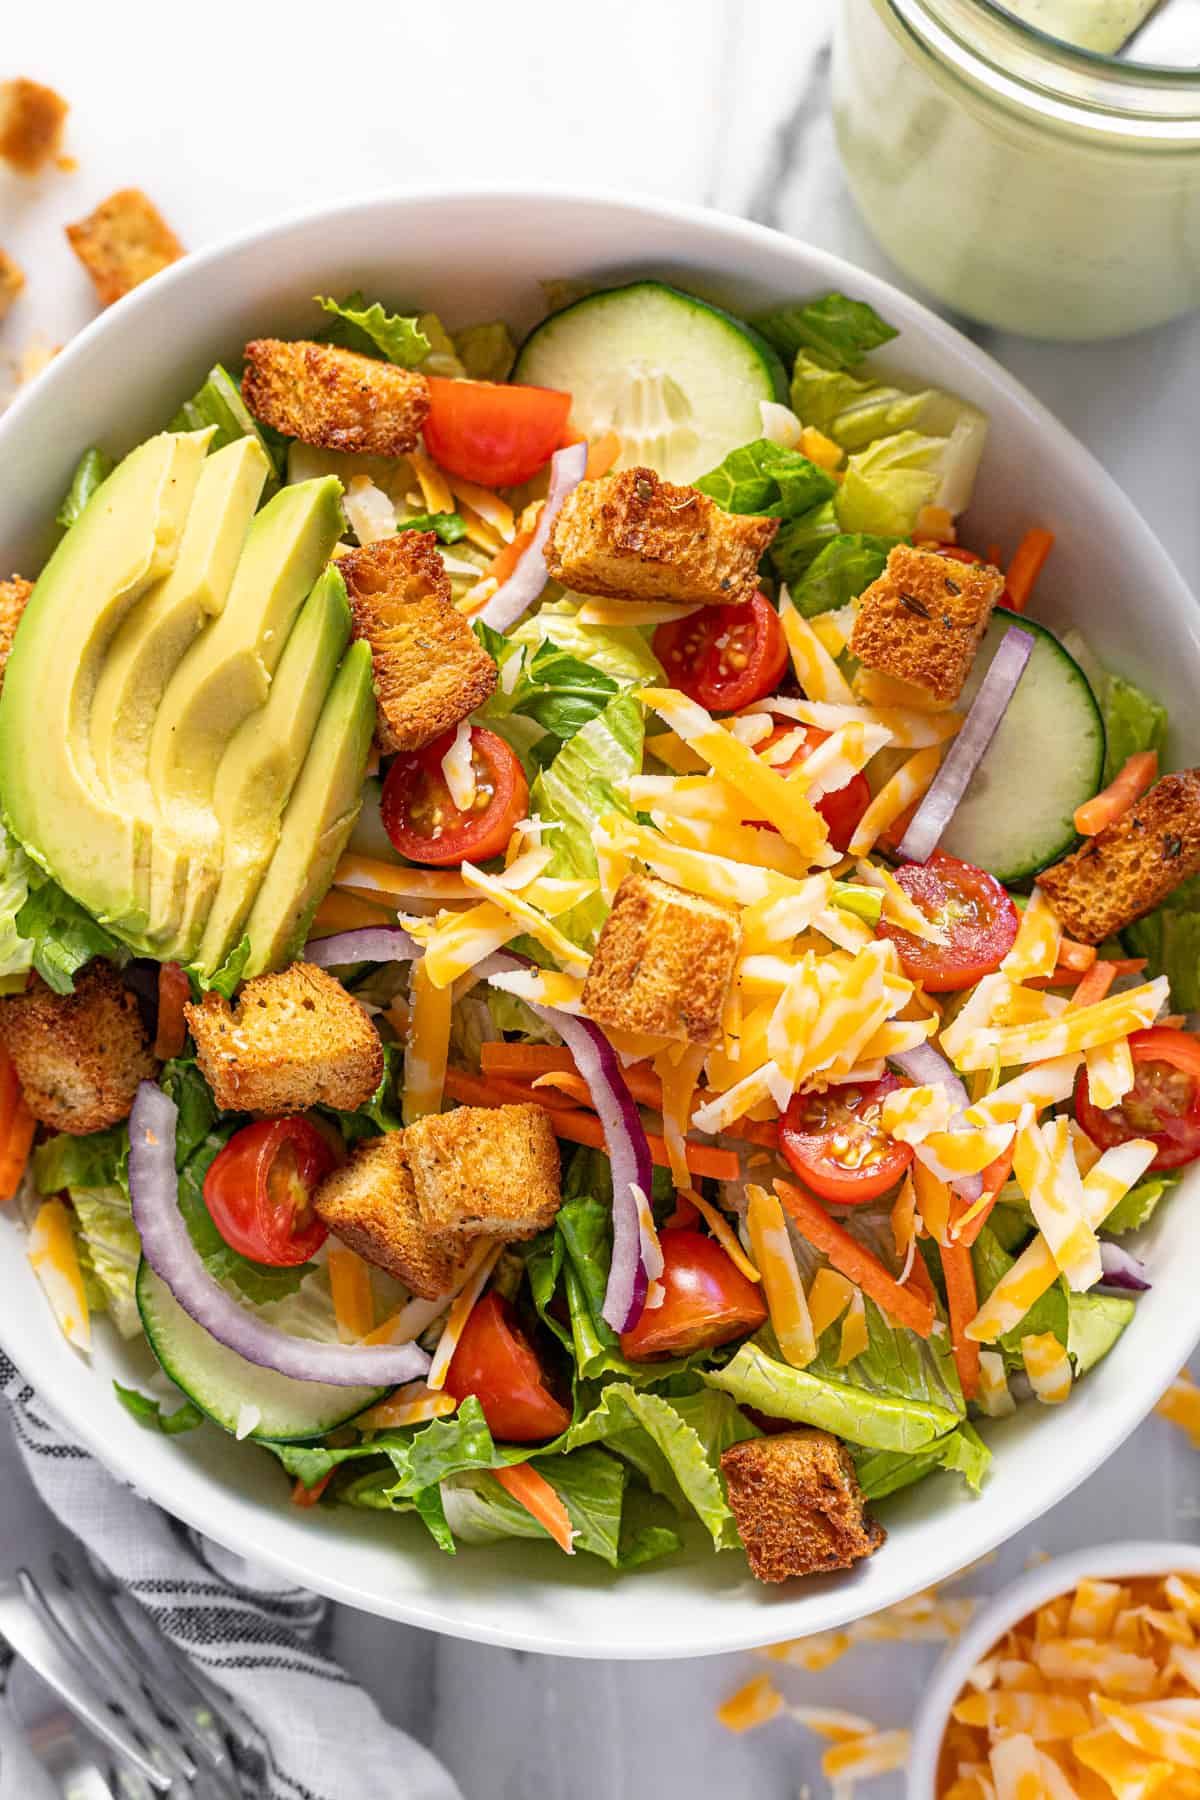 Large bowl filled with house salad filled with veggies, cheese, and croutons.